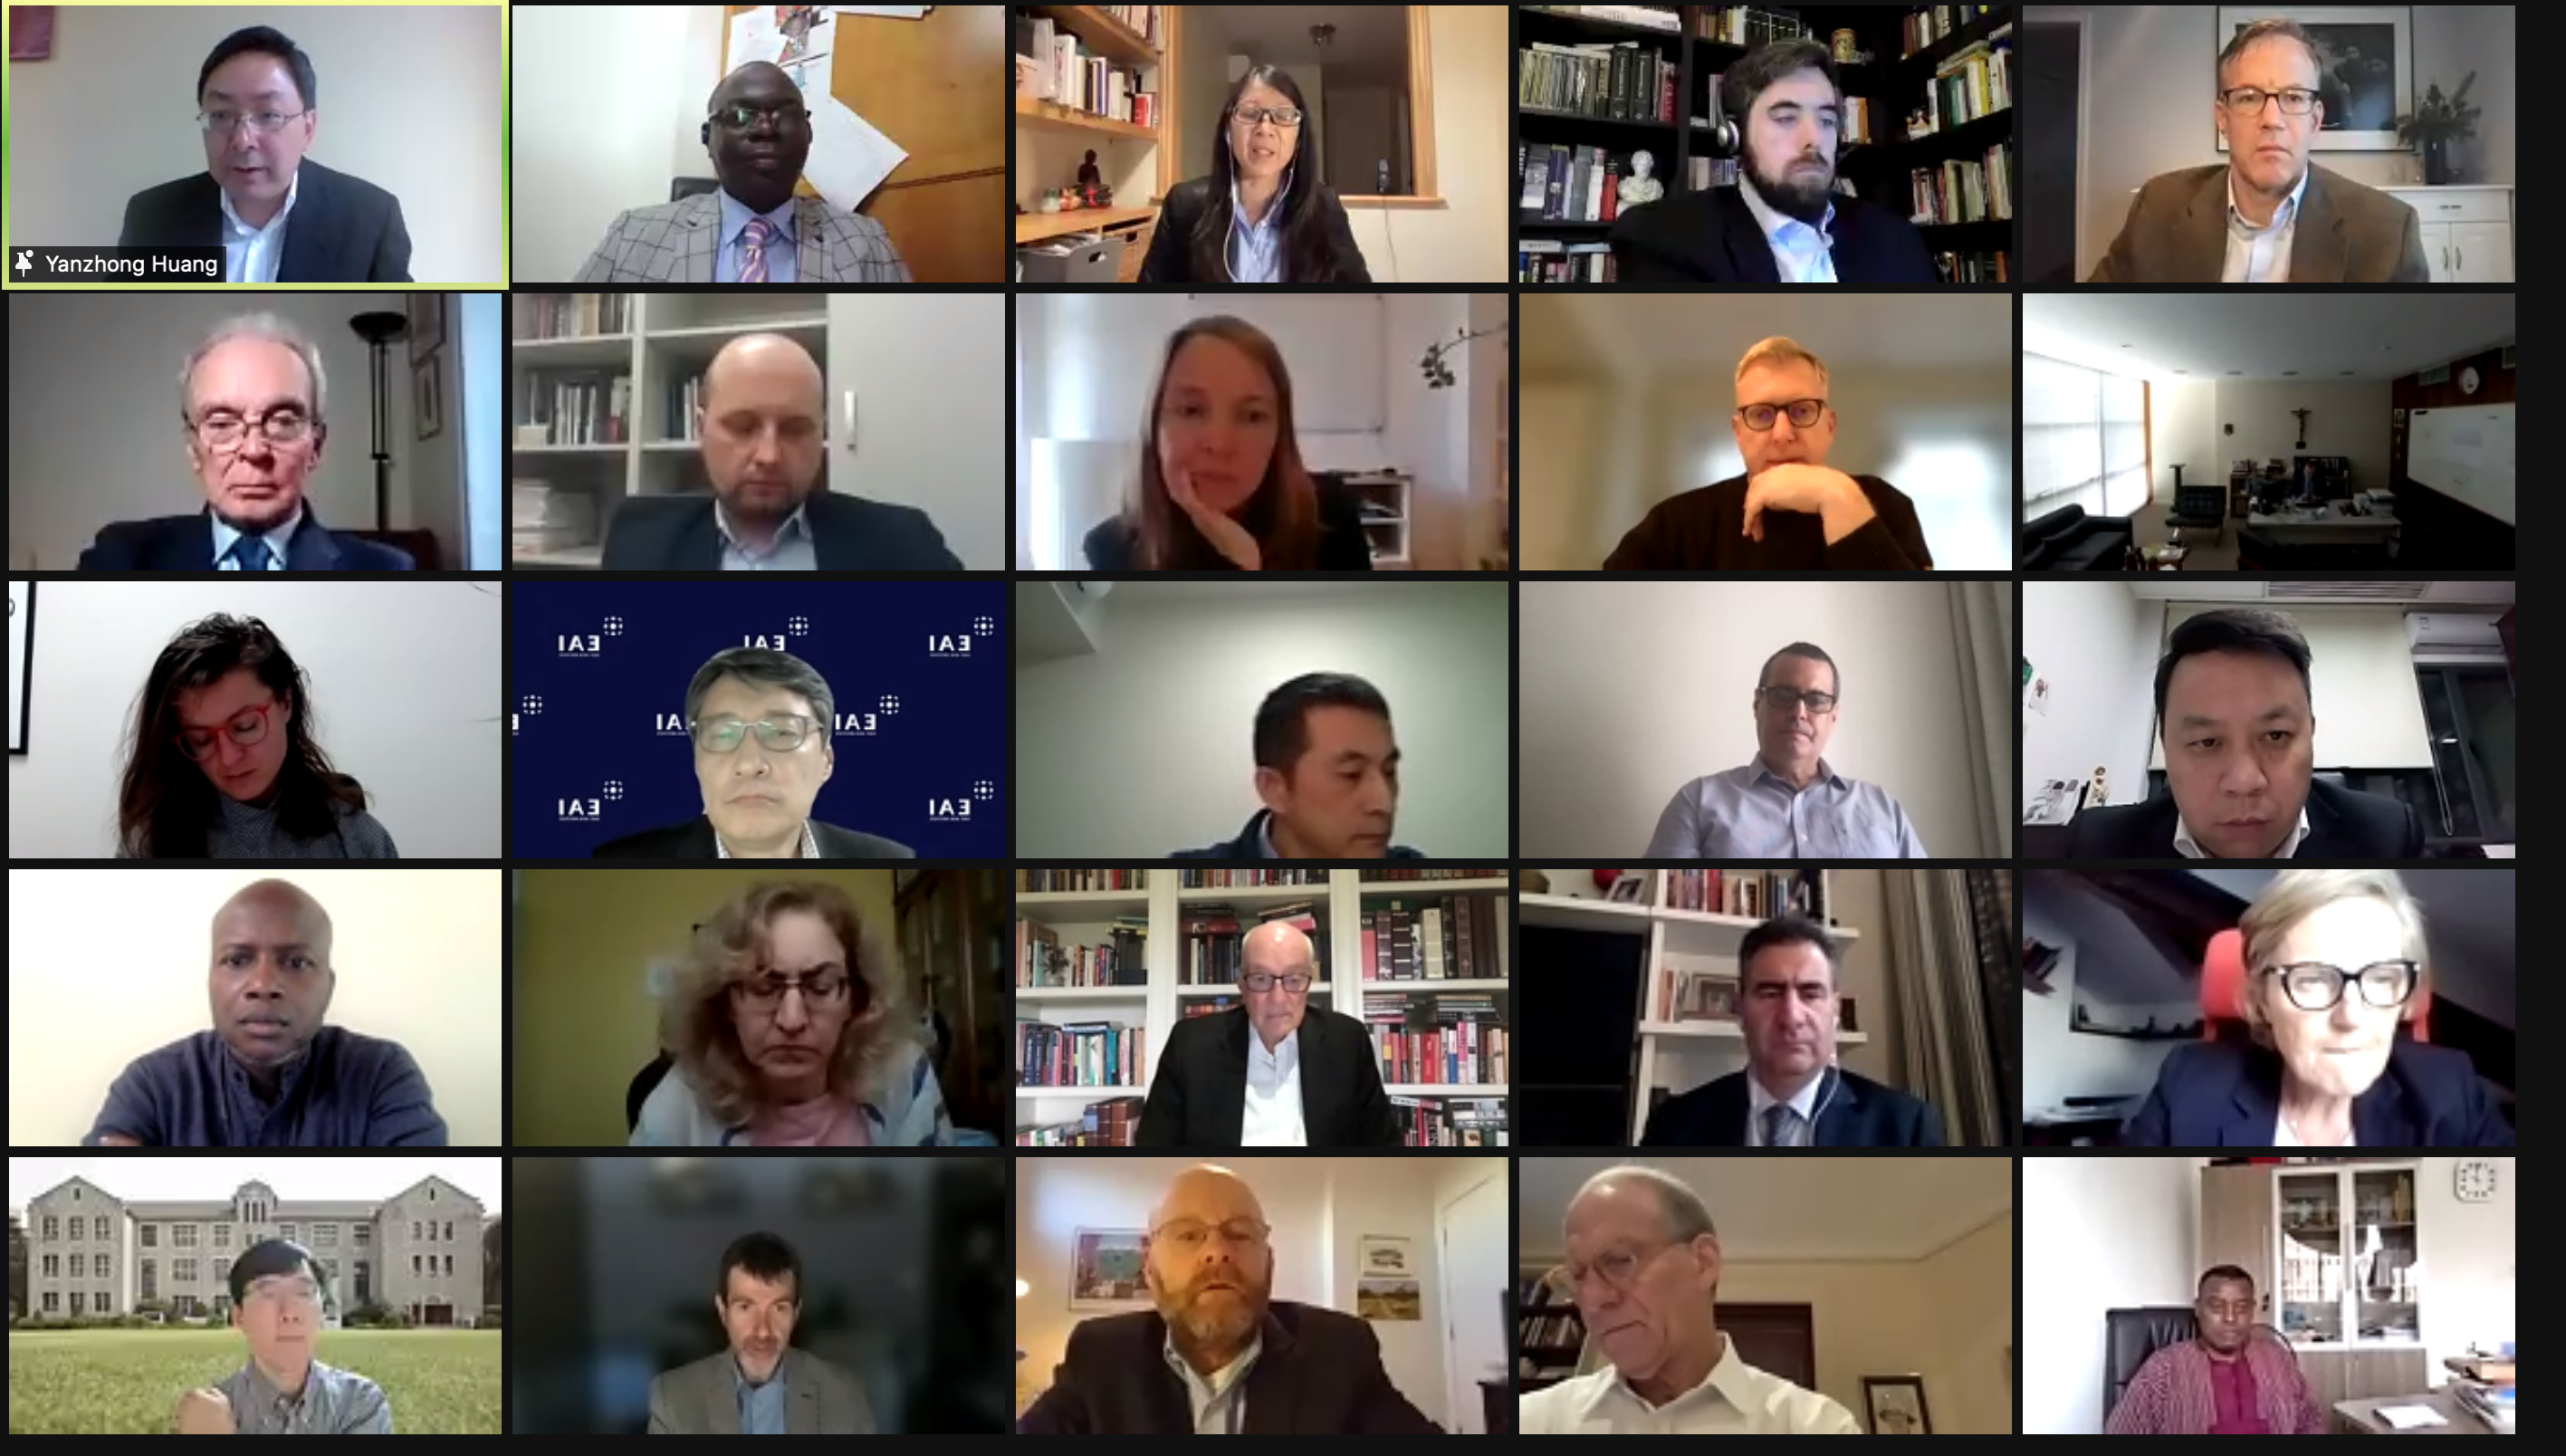 The Council of Councils Fourth Virtual Conference